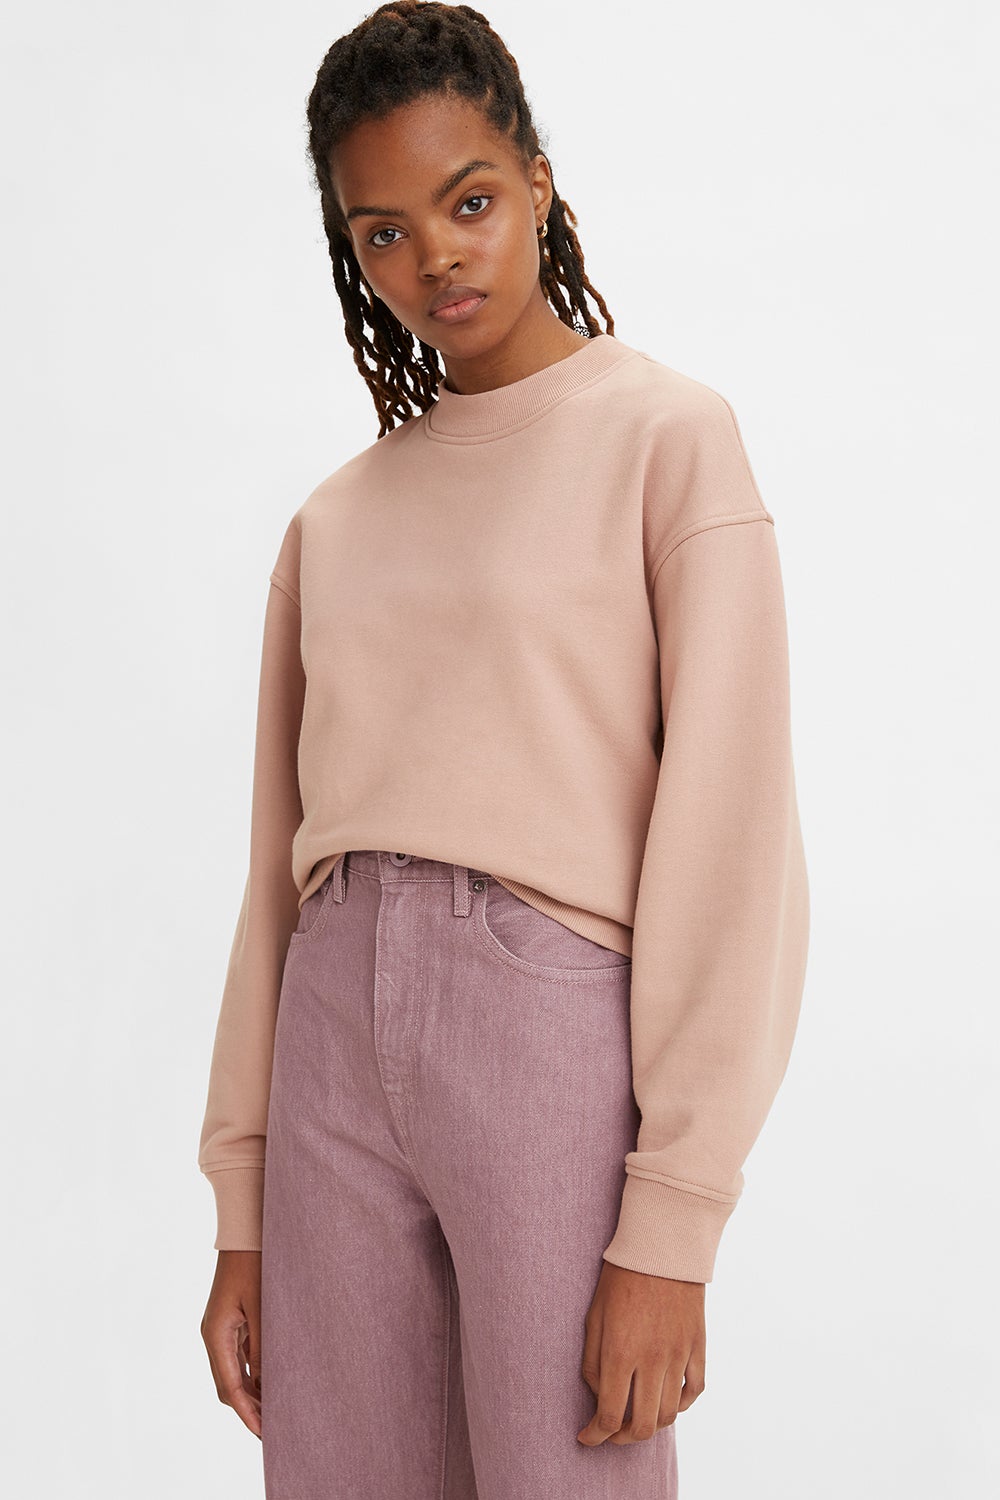 Levi's Made and Crafted Classic Crewneck Fawn